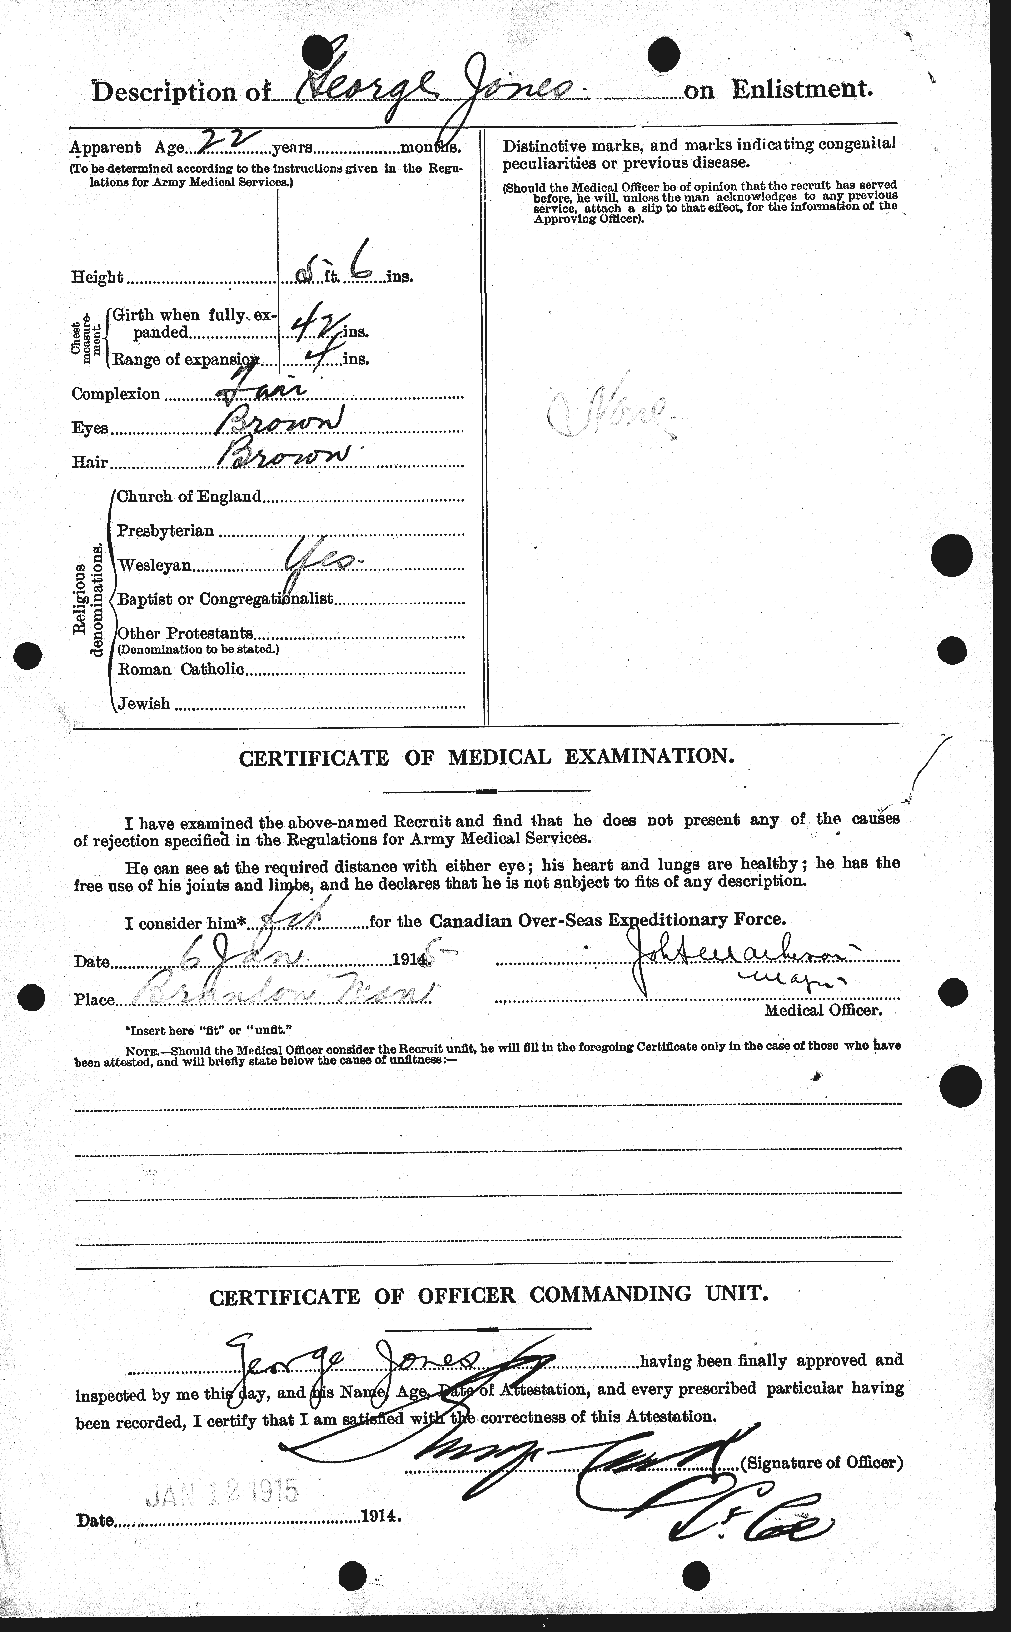 Personnel Records of the First World War - CEF 425198b